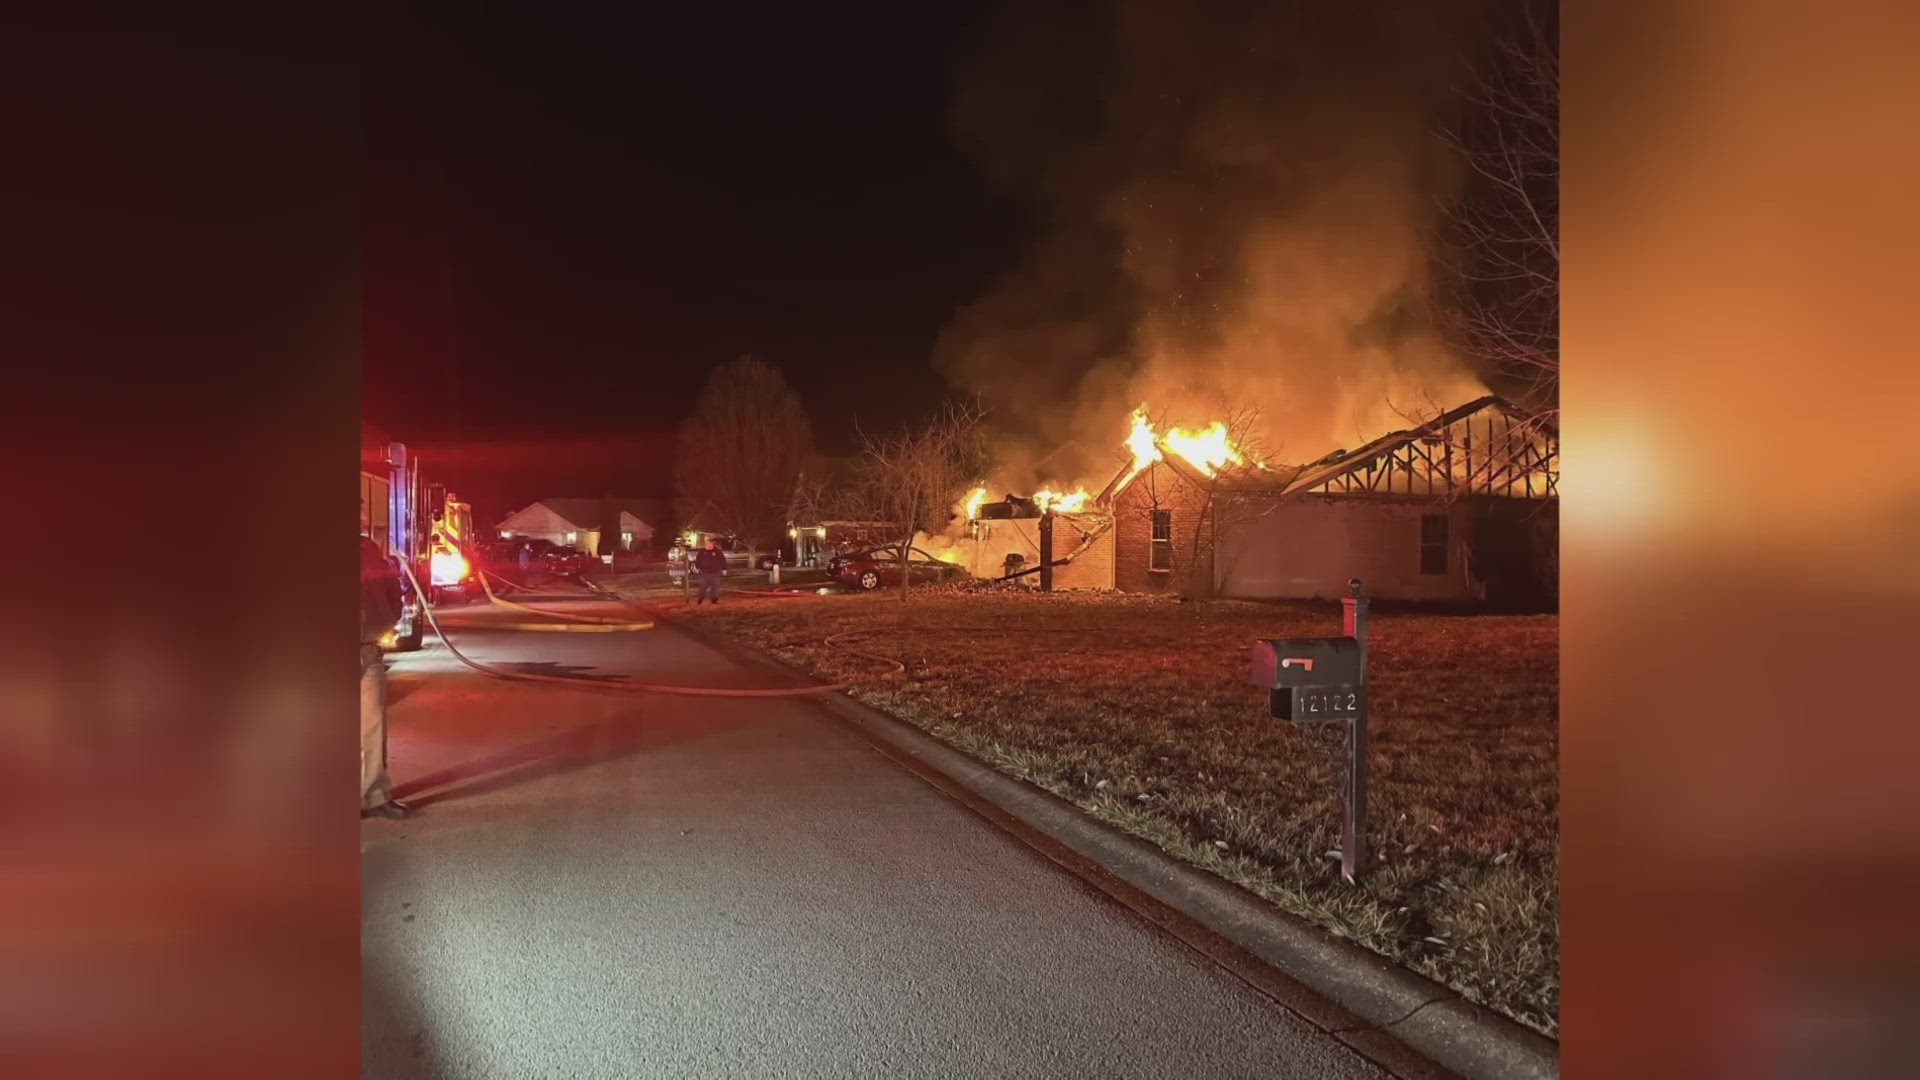 Tri-Township Fire & Rescue said they were called to a home in Memphis, Indiana  as reports of witnesses hearing an explosion. They found a home engulfed in flames.